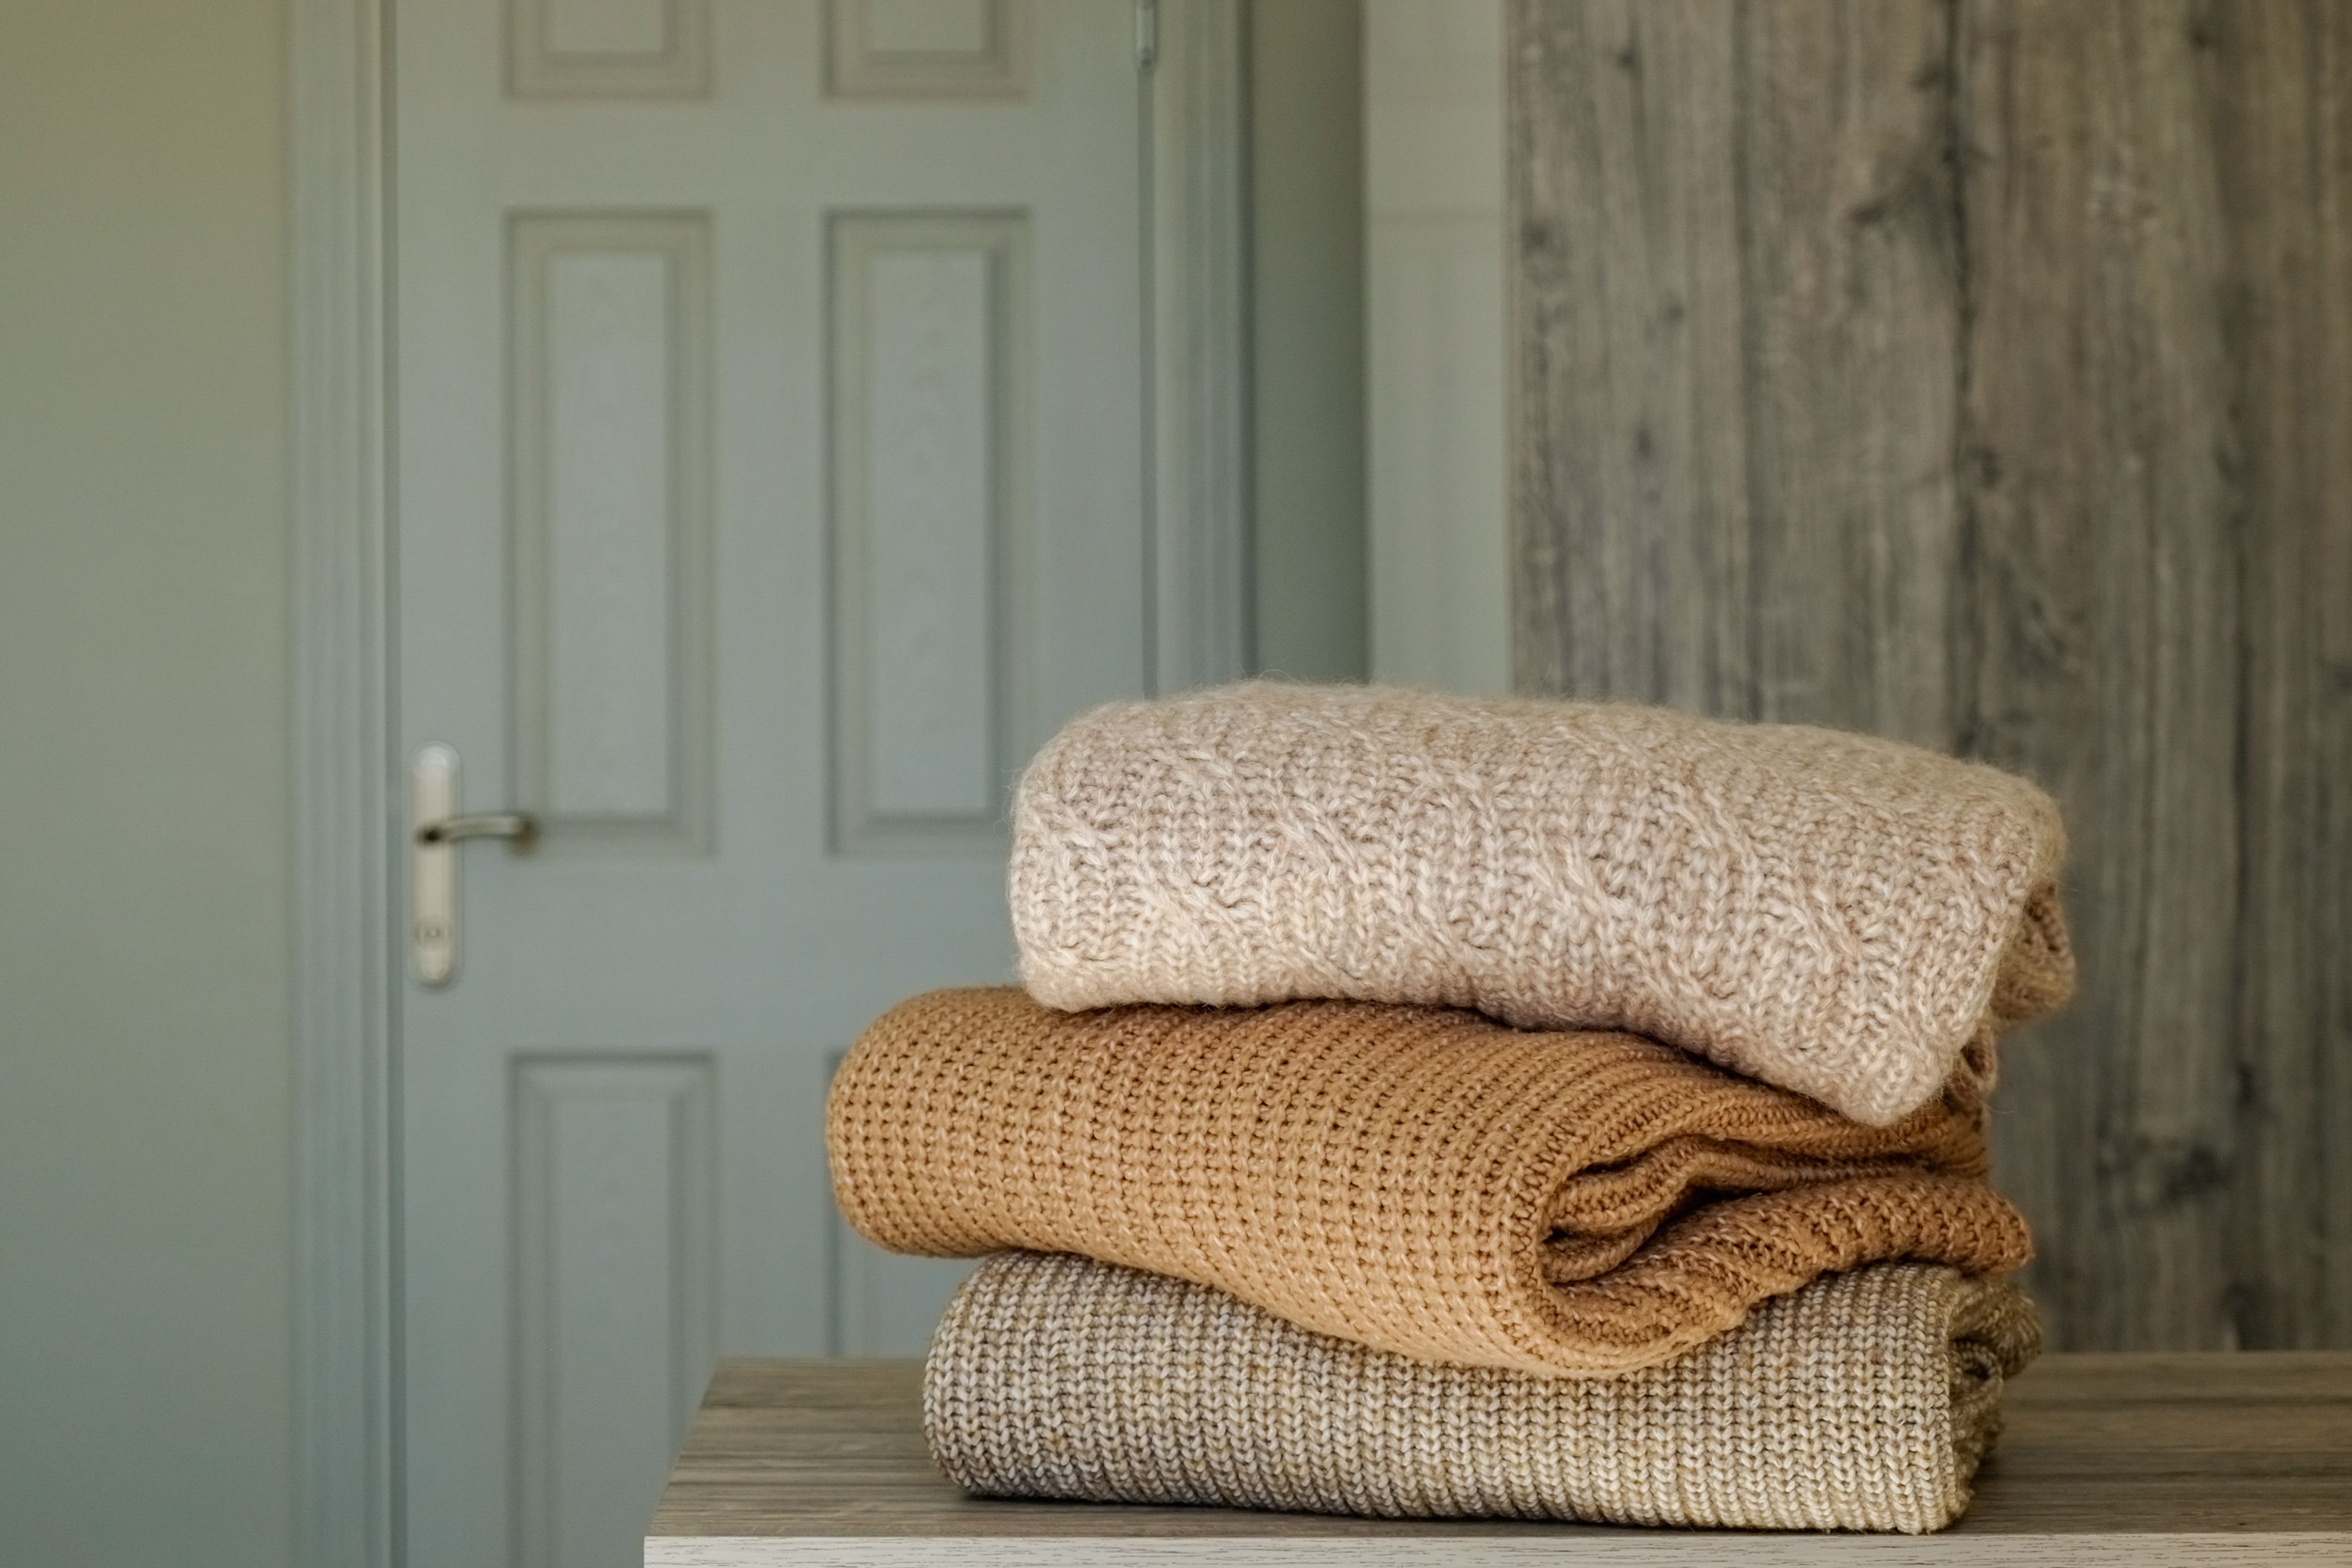 How to Wash and Care for Cashmere Sweaters, Scarves and More